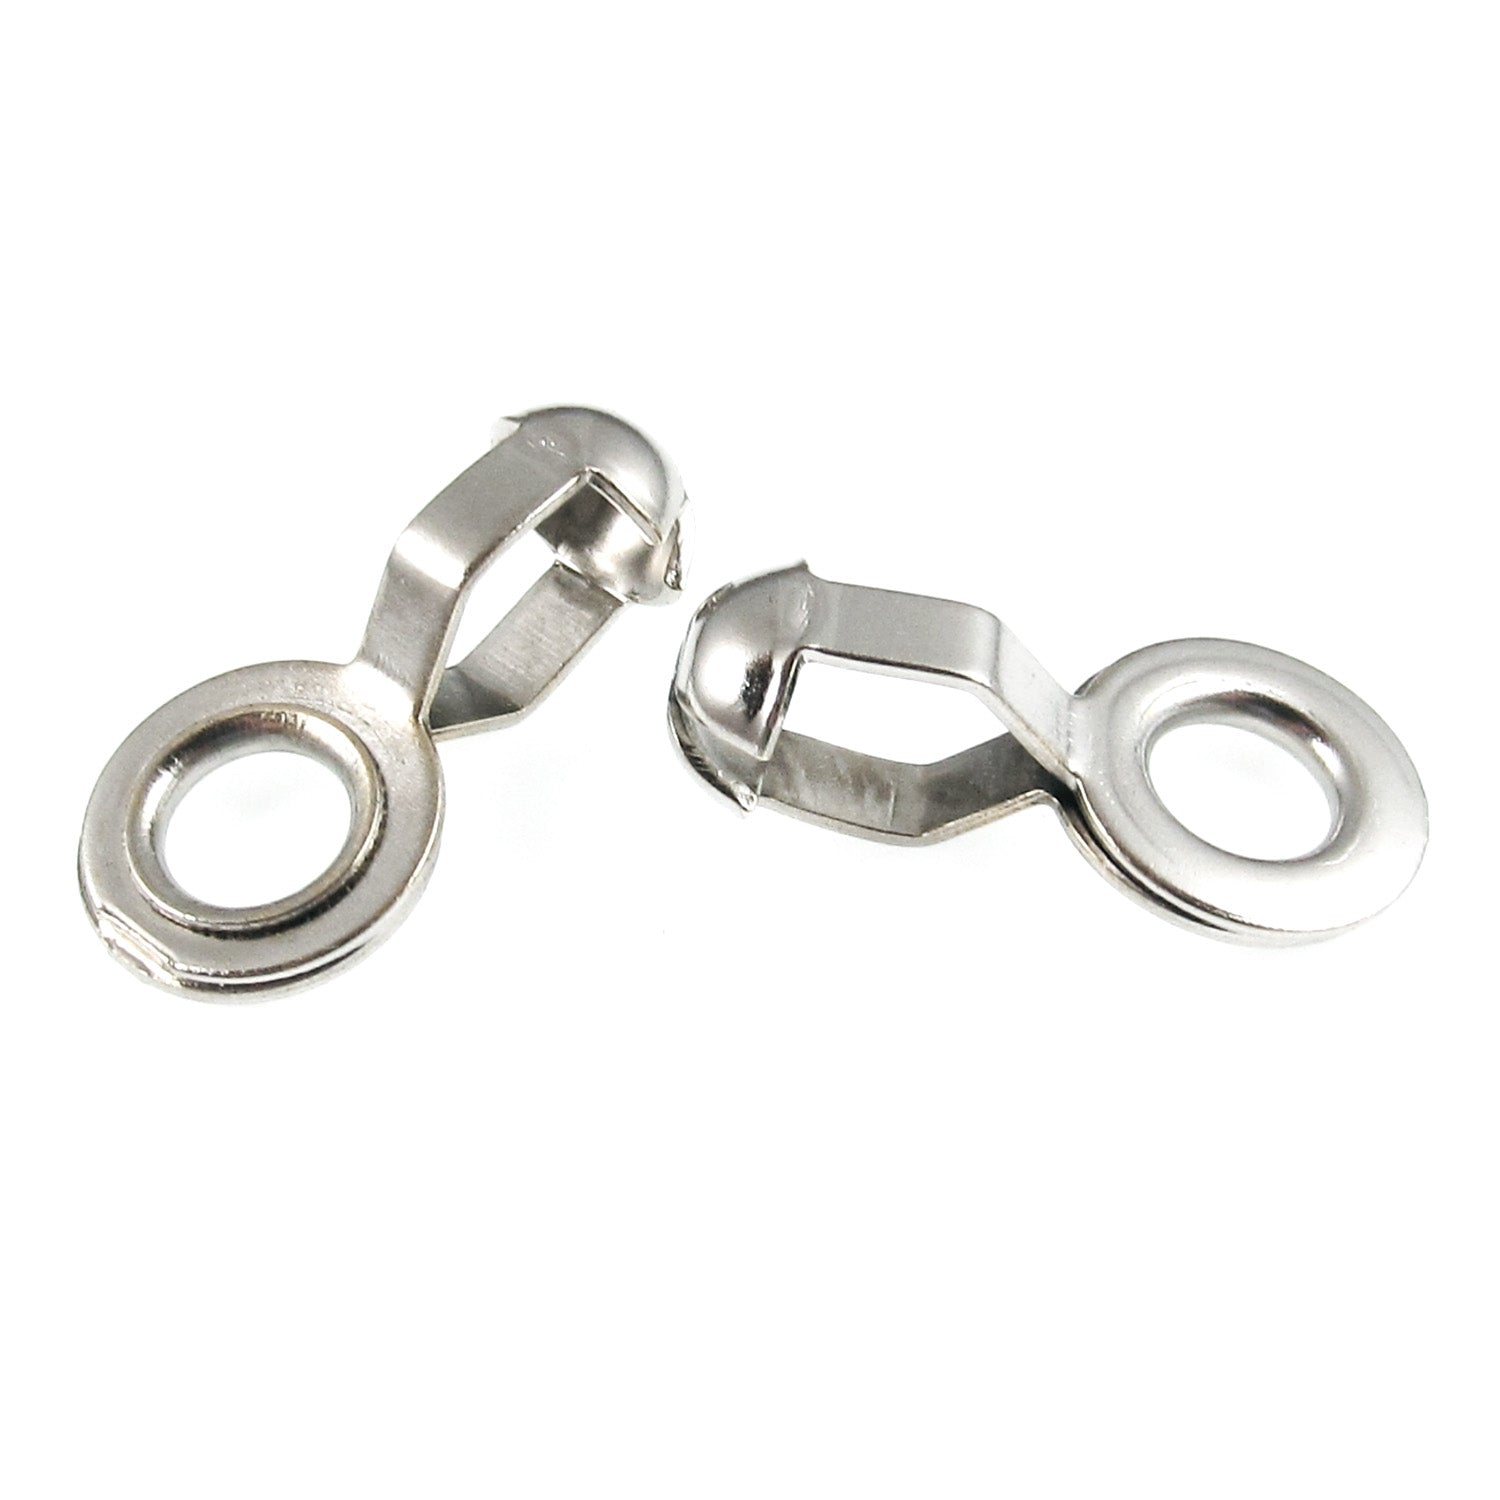 #15 Nickel Plated Steel Ball Chain connectors